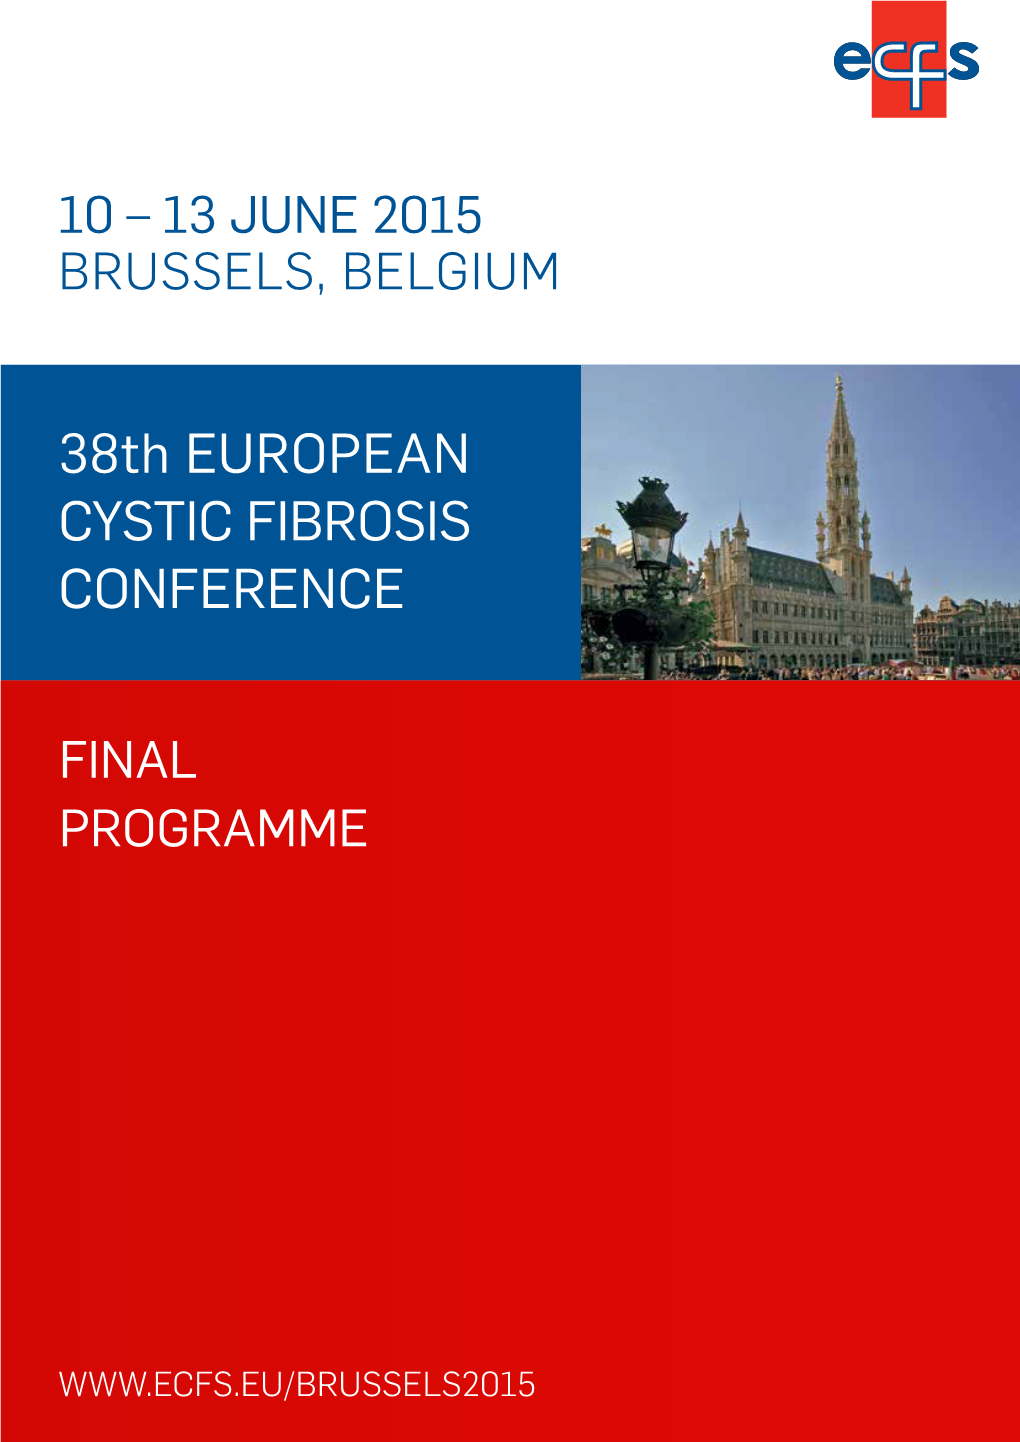 38Th EUROPEAN CYSTIC FIBROSIS CONFERENCE